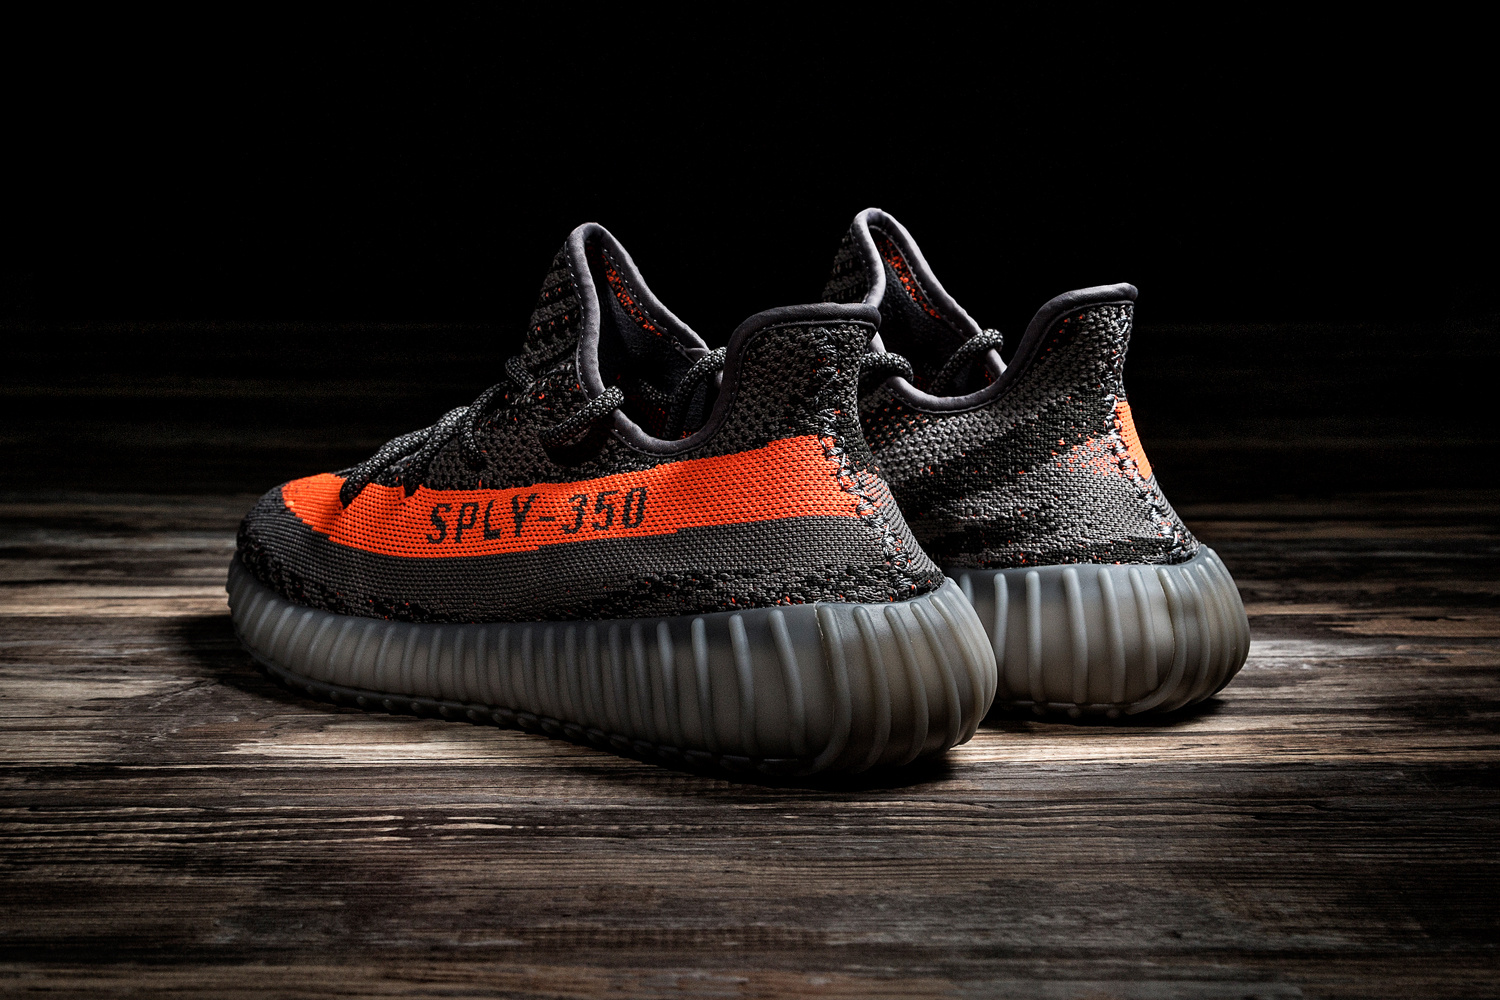 A Closer Look At The Adidas Yeezy Boost V2 Hypebeast